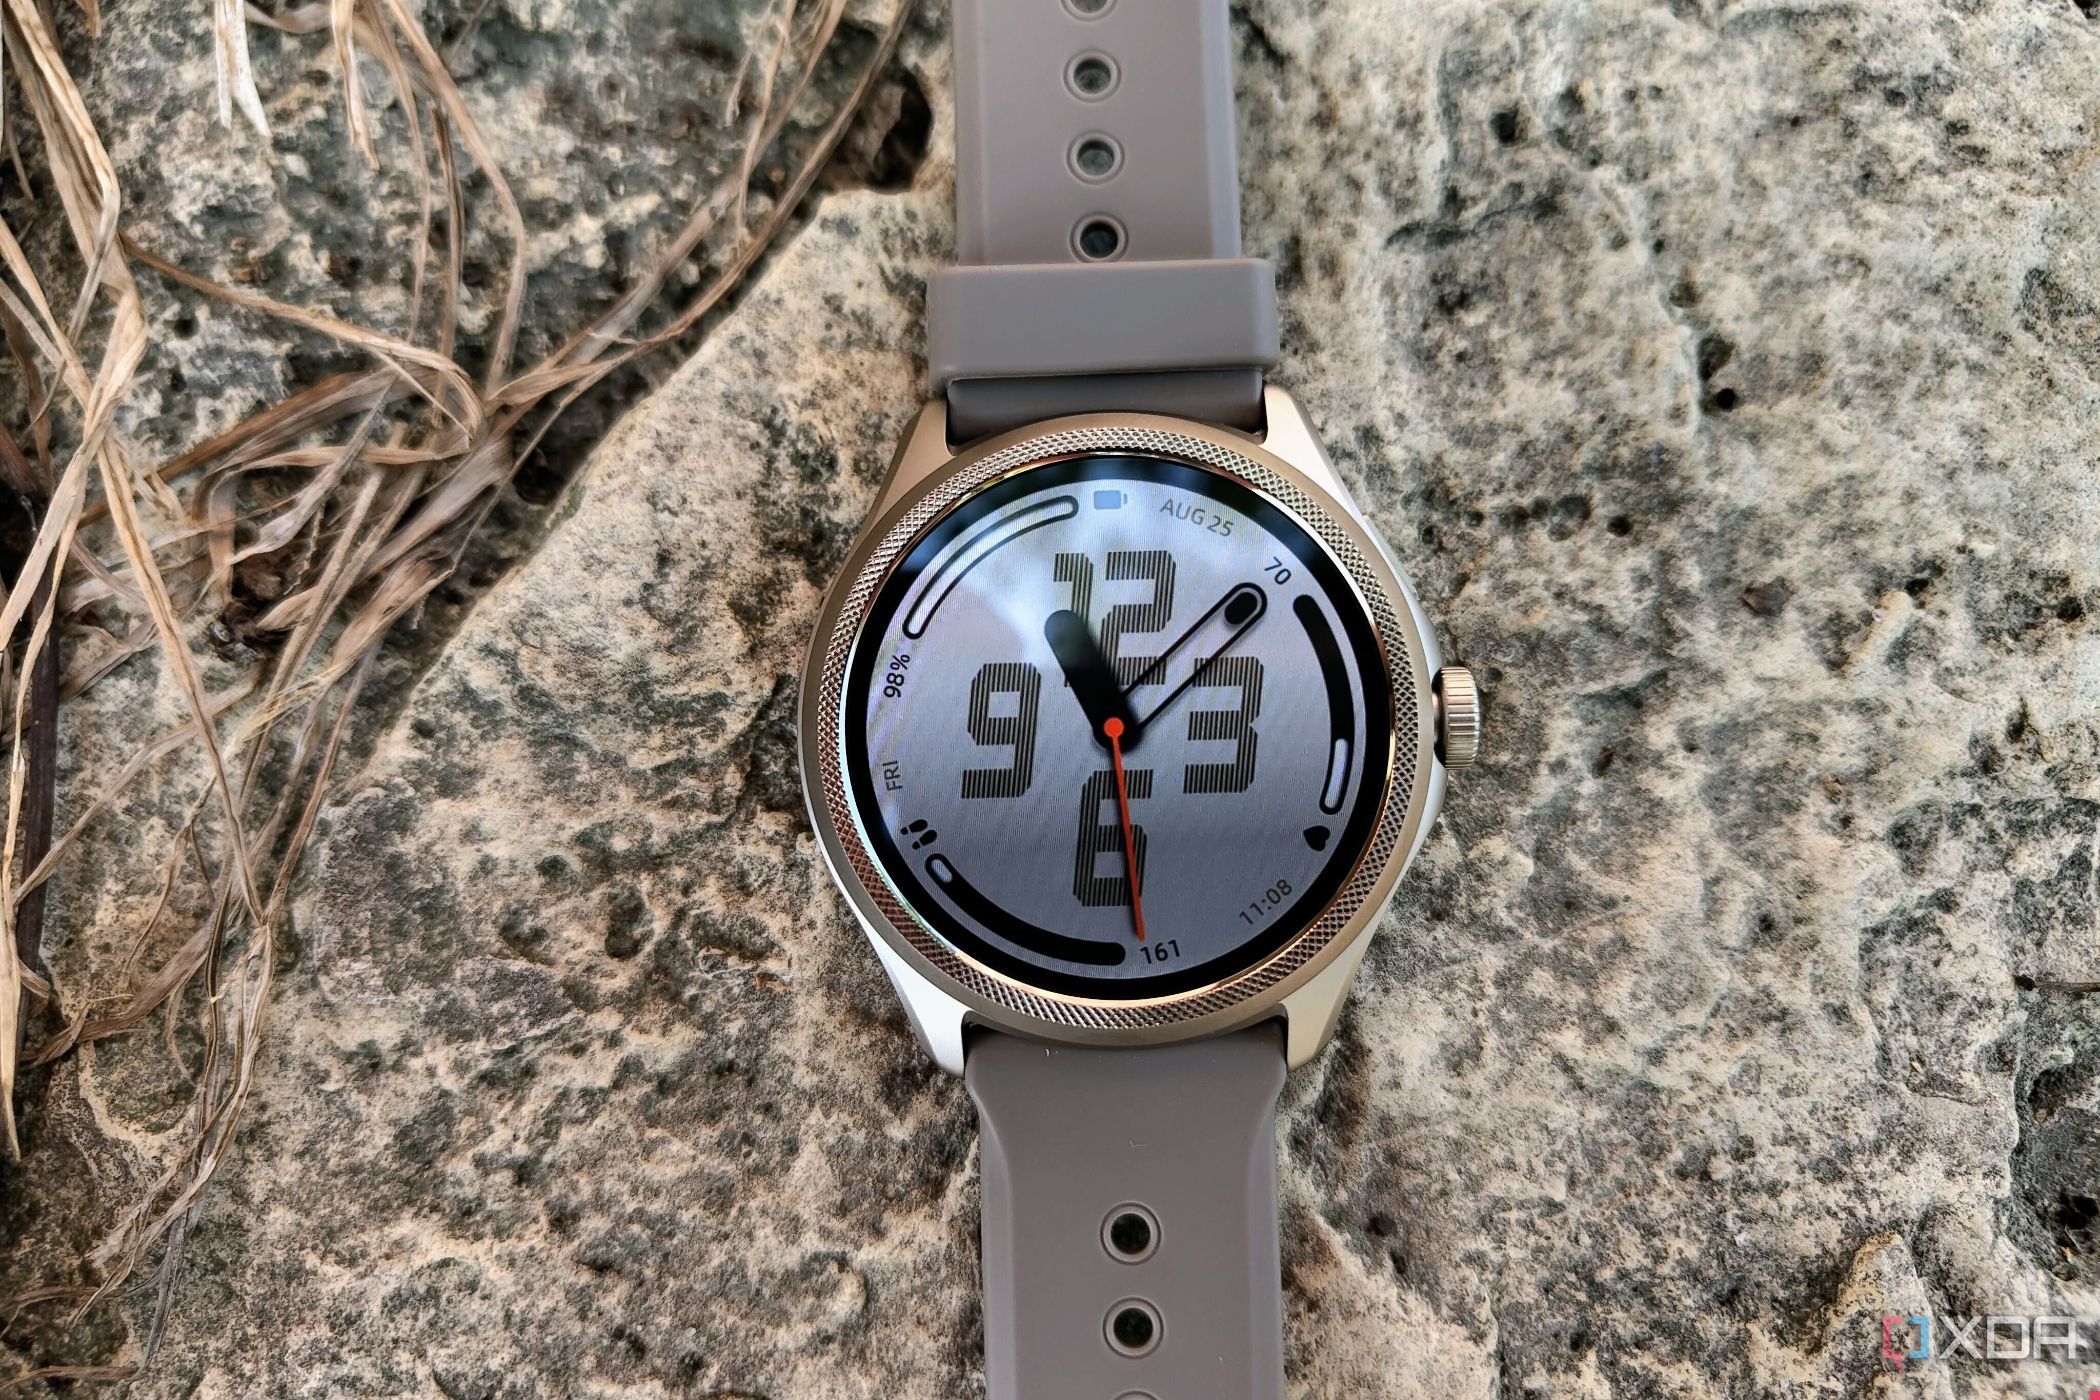 TicWatch Pro 5 falls to new lowest price